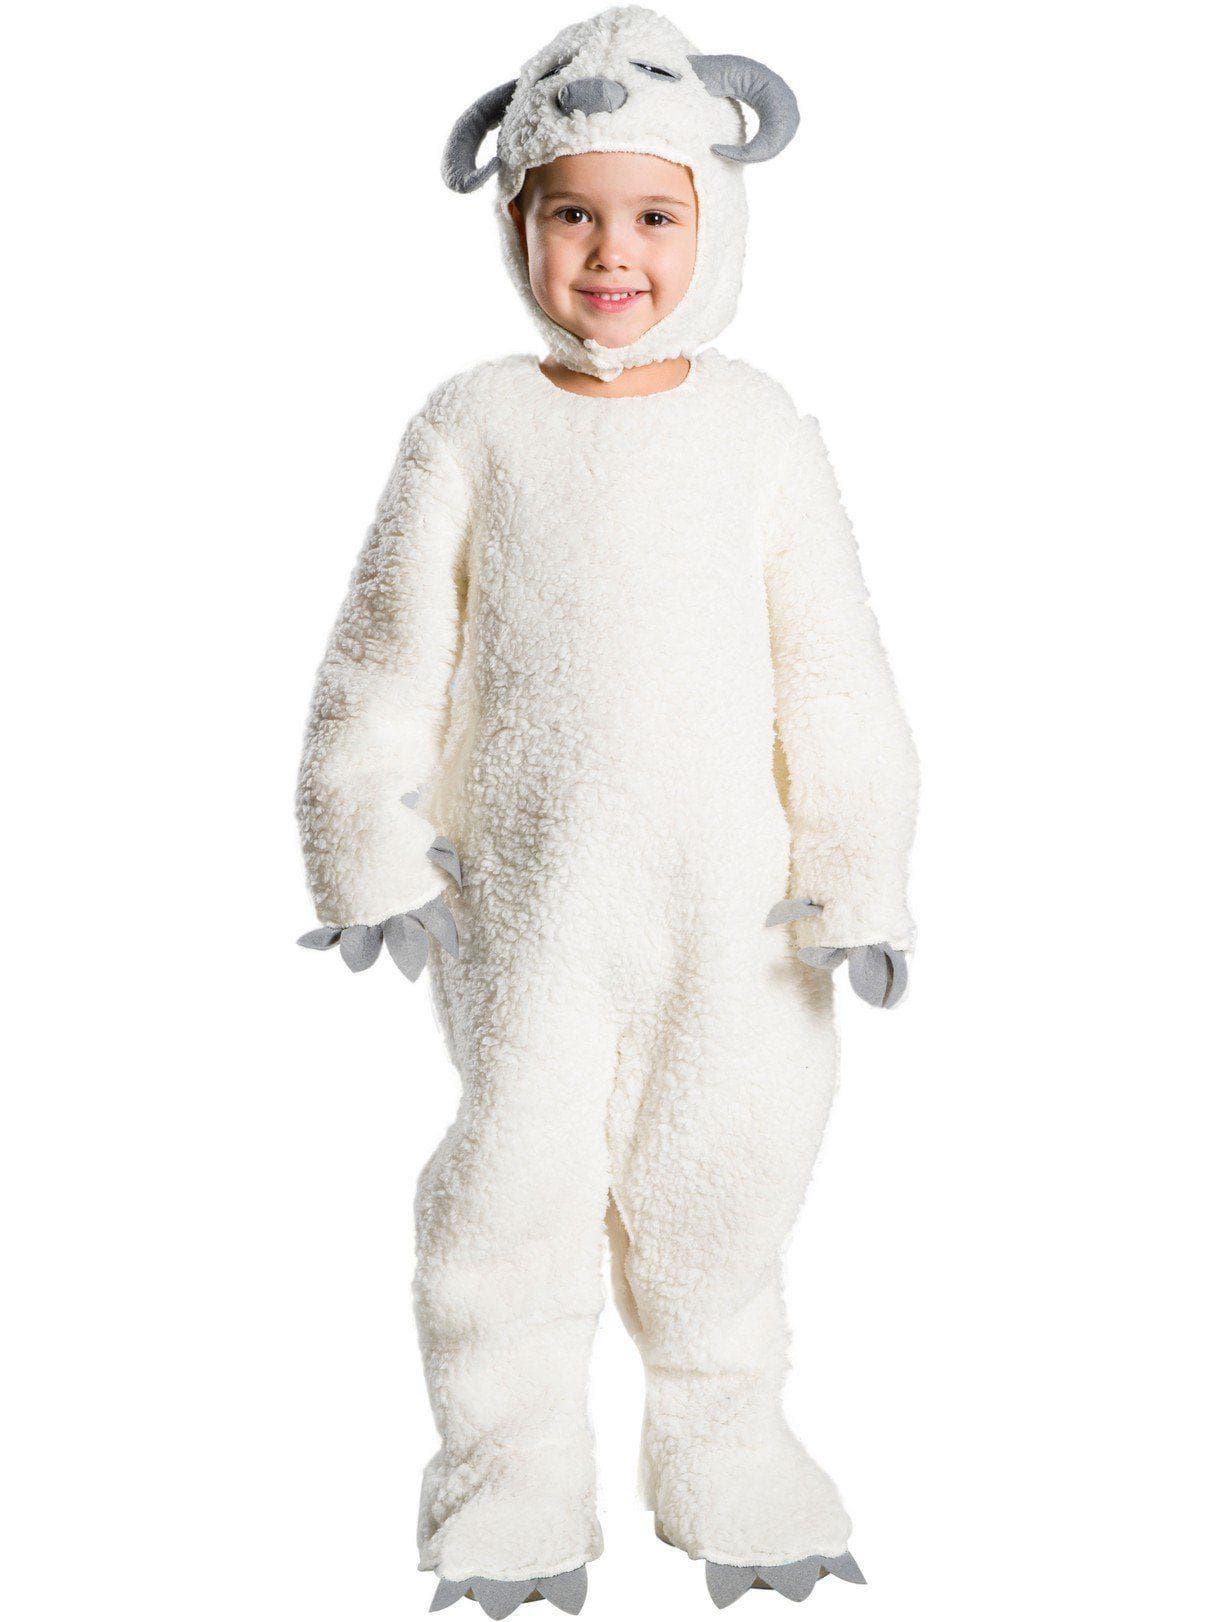 Baby/Toddler Classic Star Wars Wampa Deluxe Costume - costumes.com